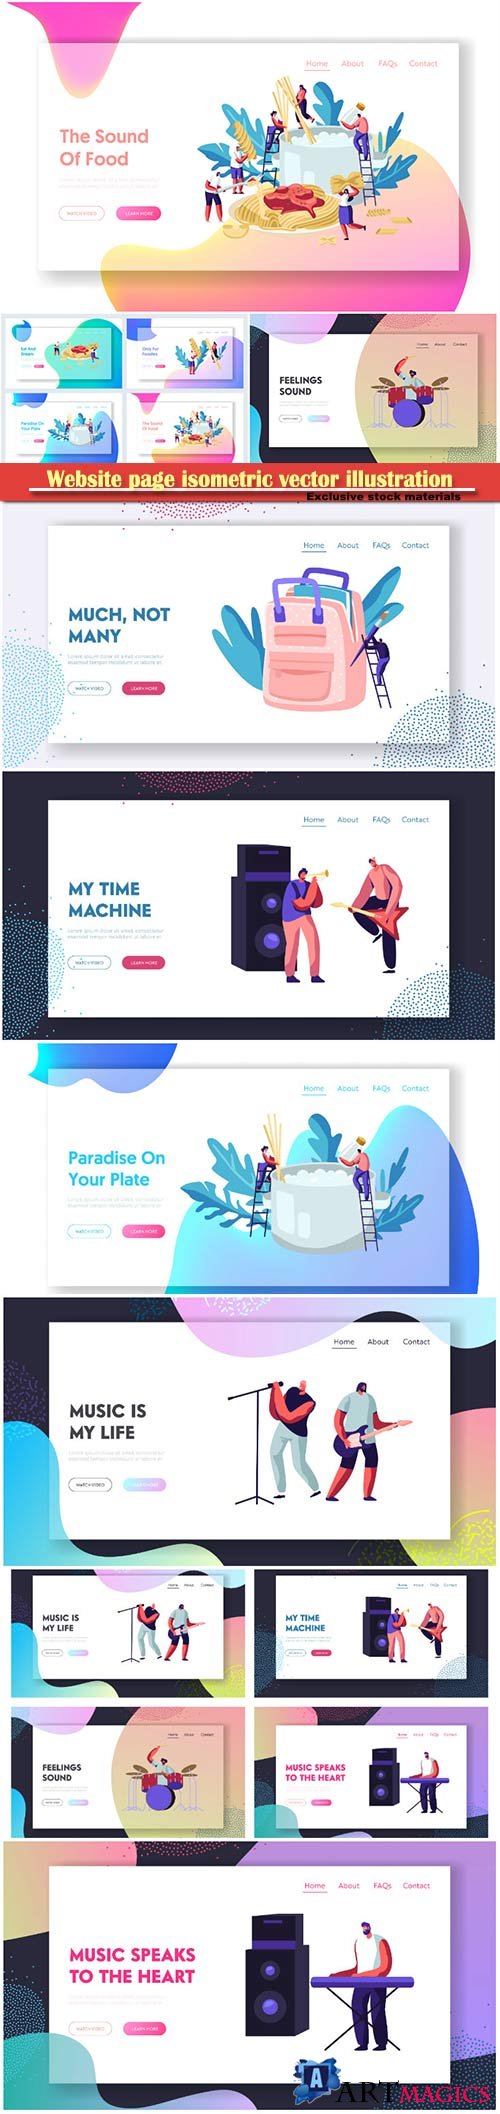 Website page isometric vector illustration, flat banner # 2